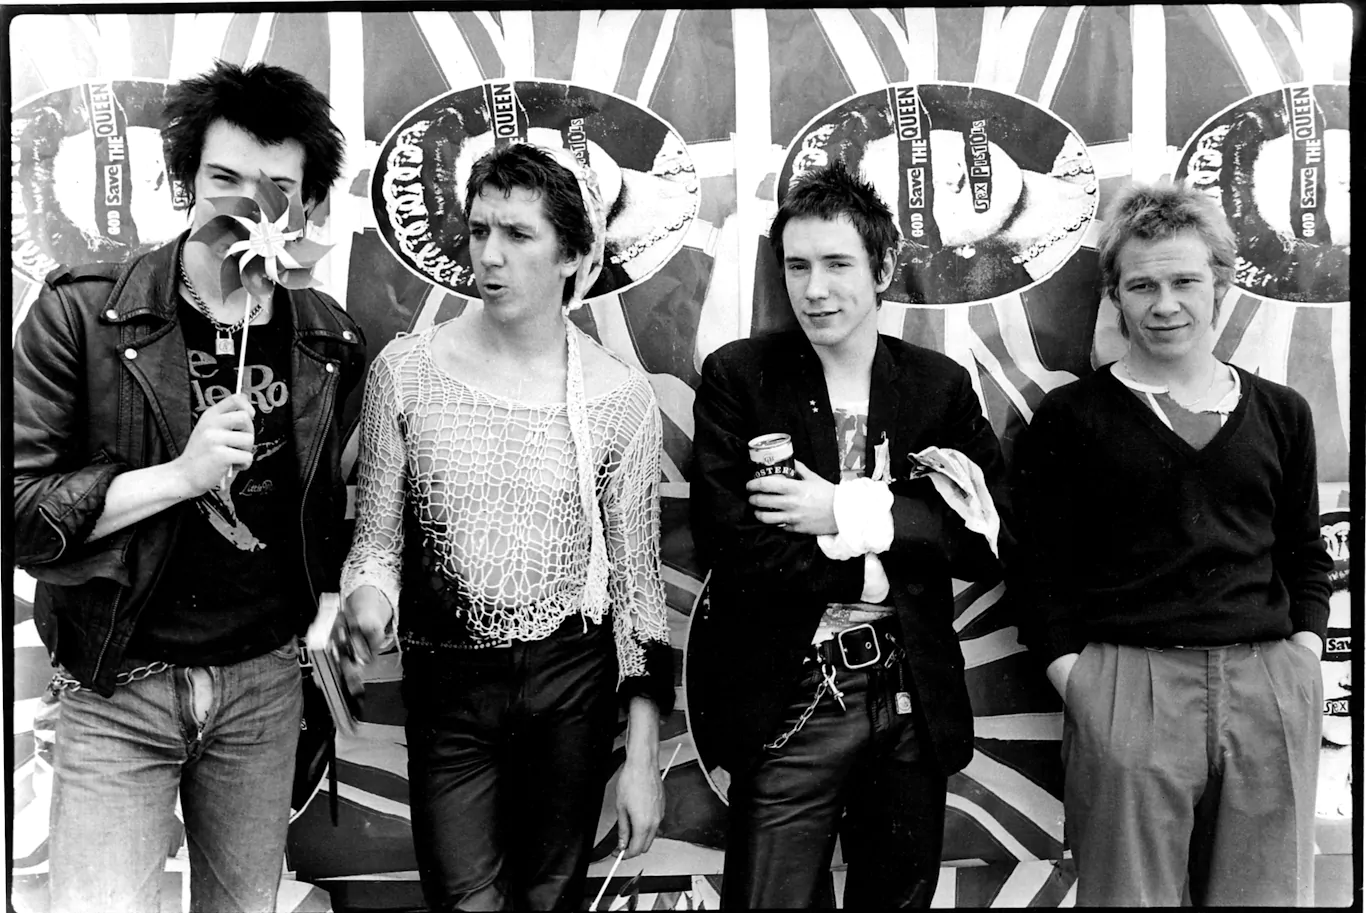 The Sex Pistols: The Original Recordings from 1976 to 1978 compilation announced on CD, vinyl and cassette 2